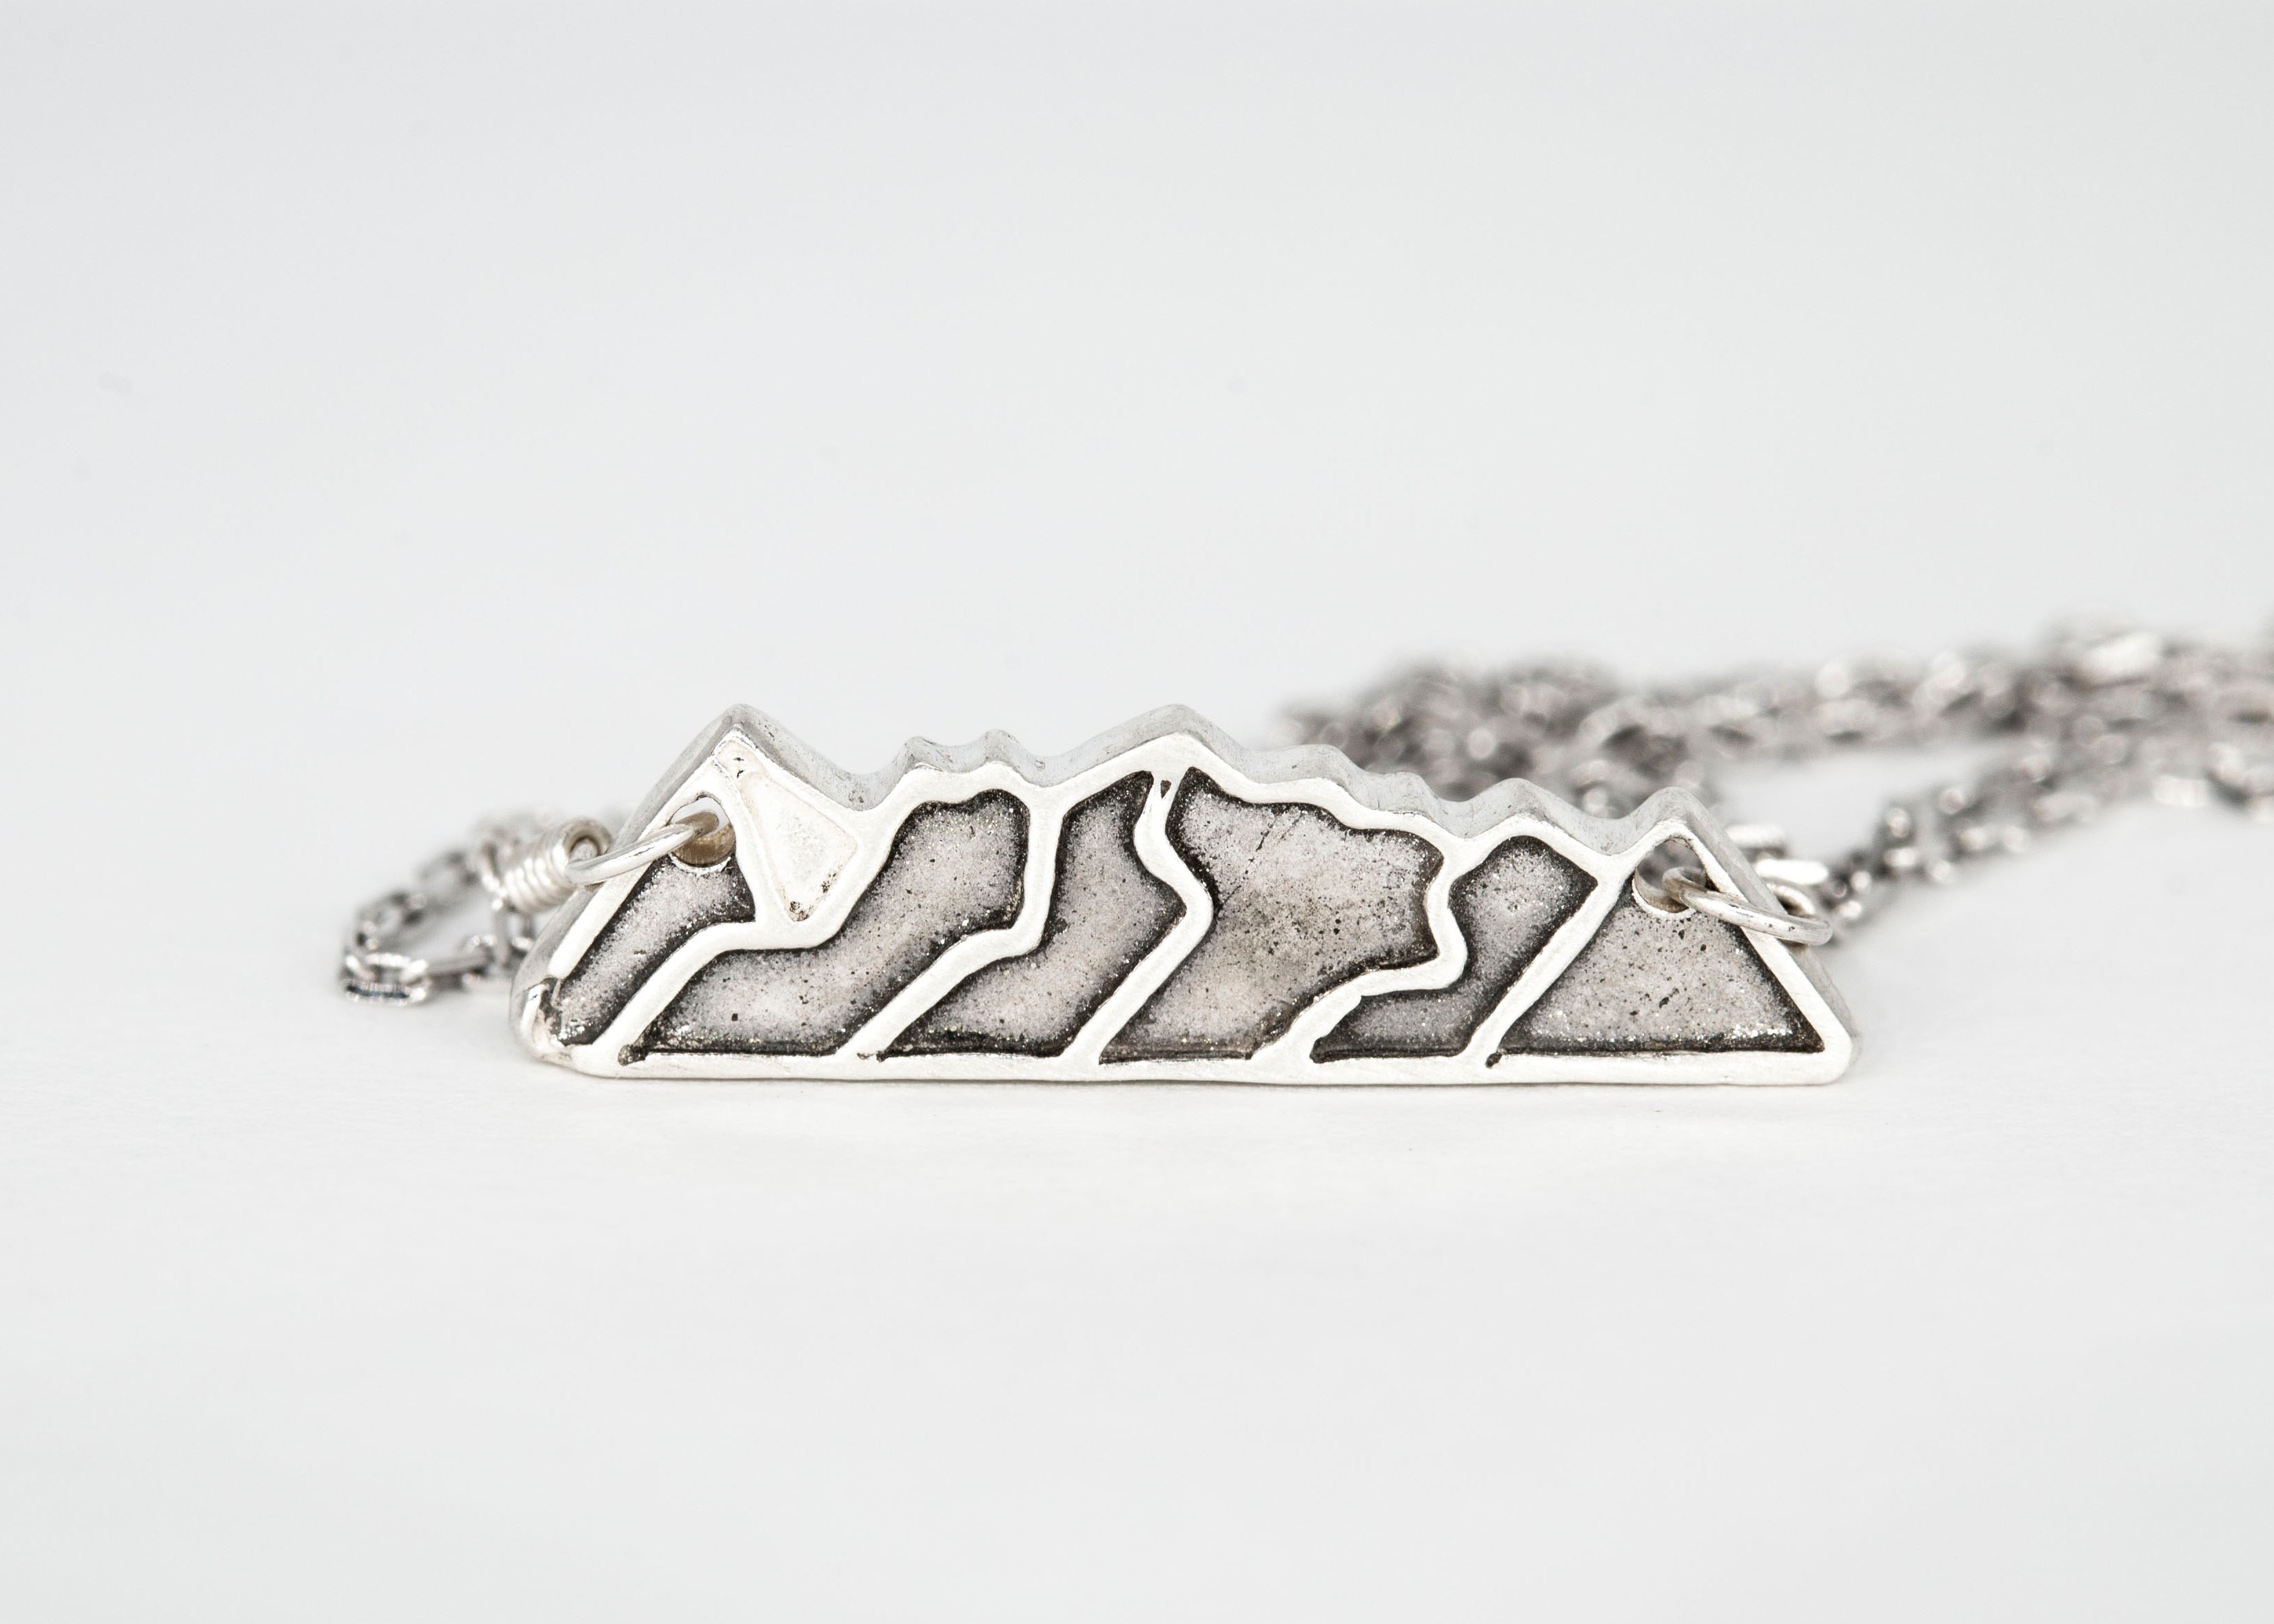 Dogtooth Range Mountain Necklace